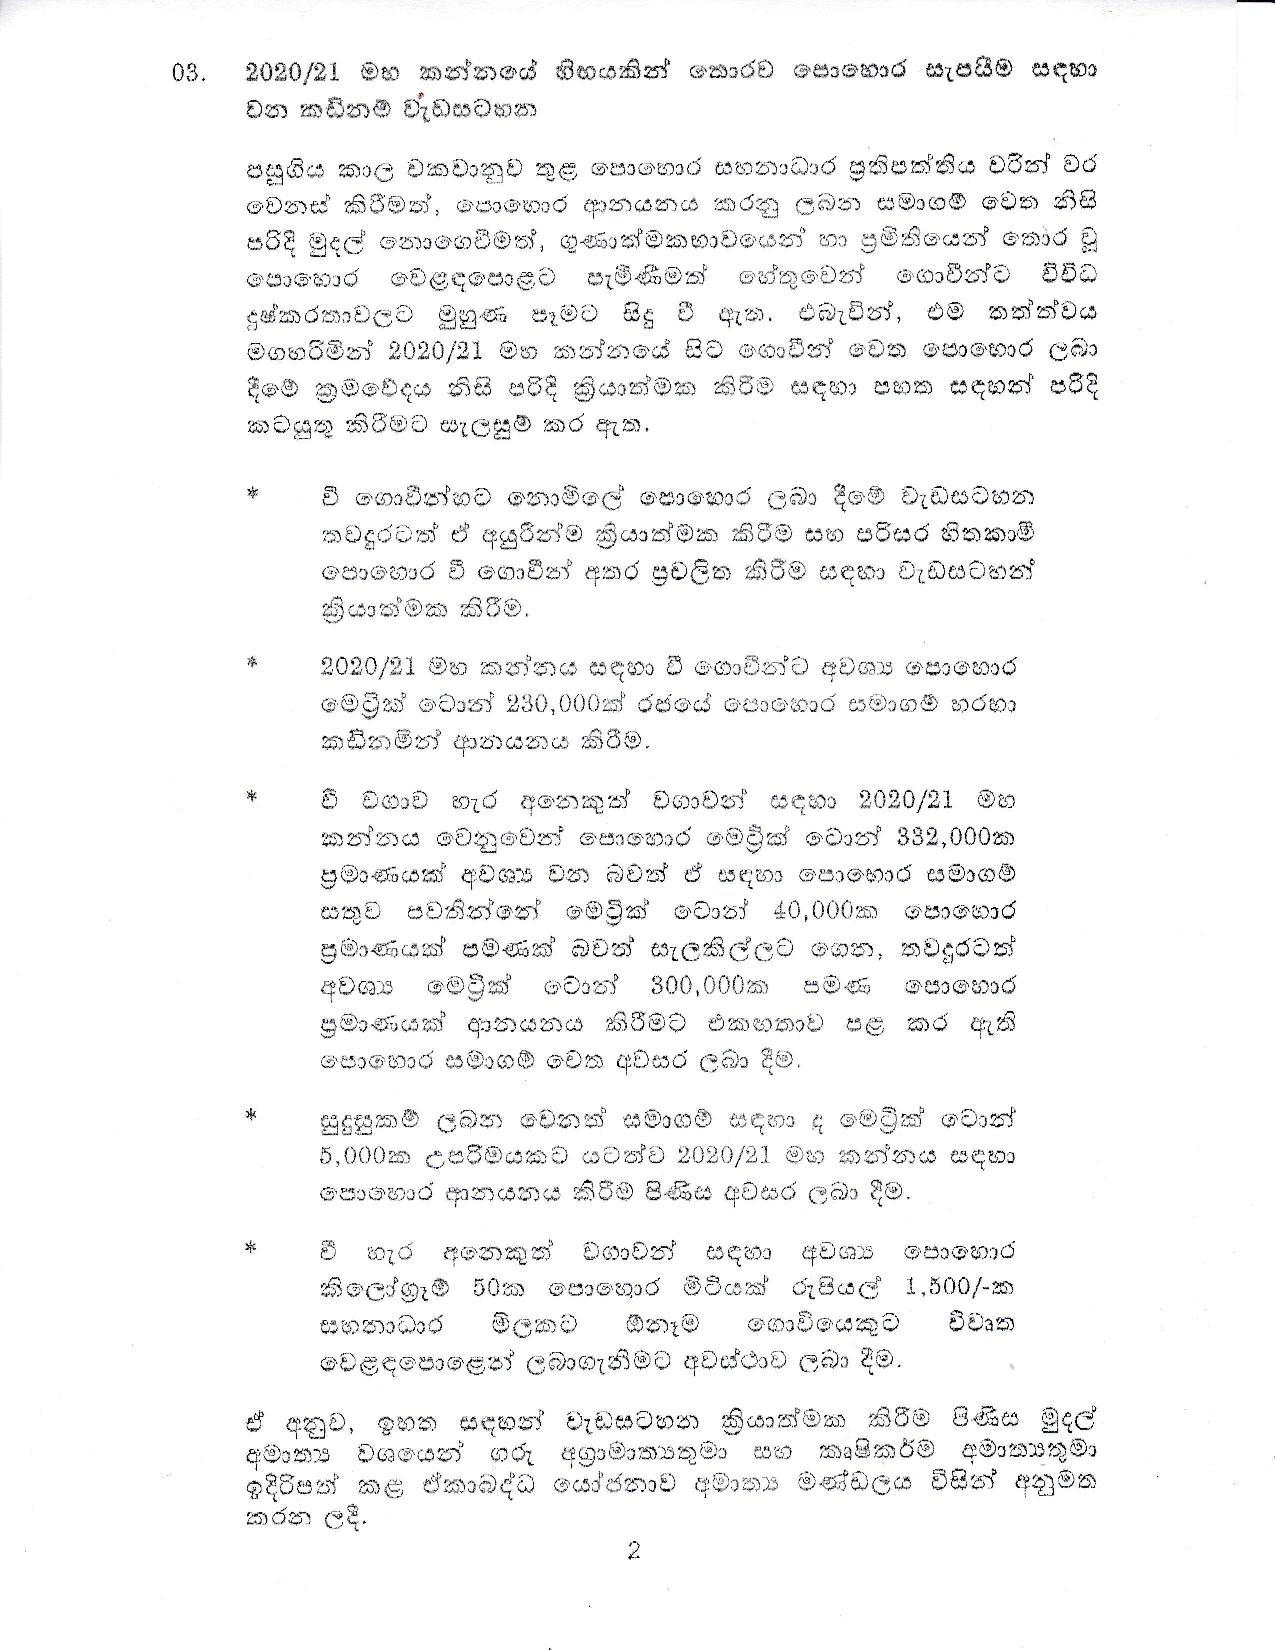 Cabinet Decision on 09.09.2020 page 002